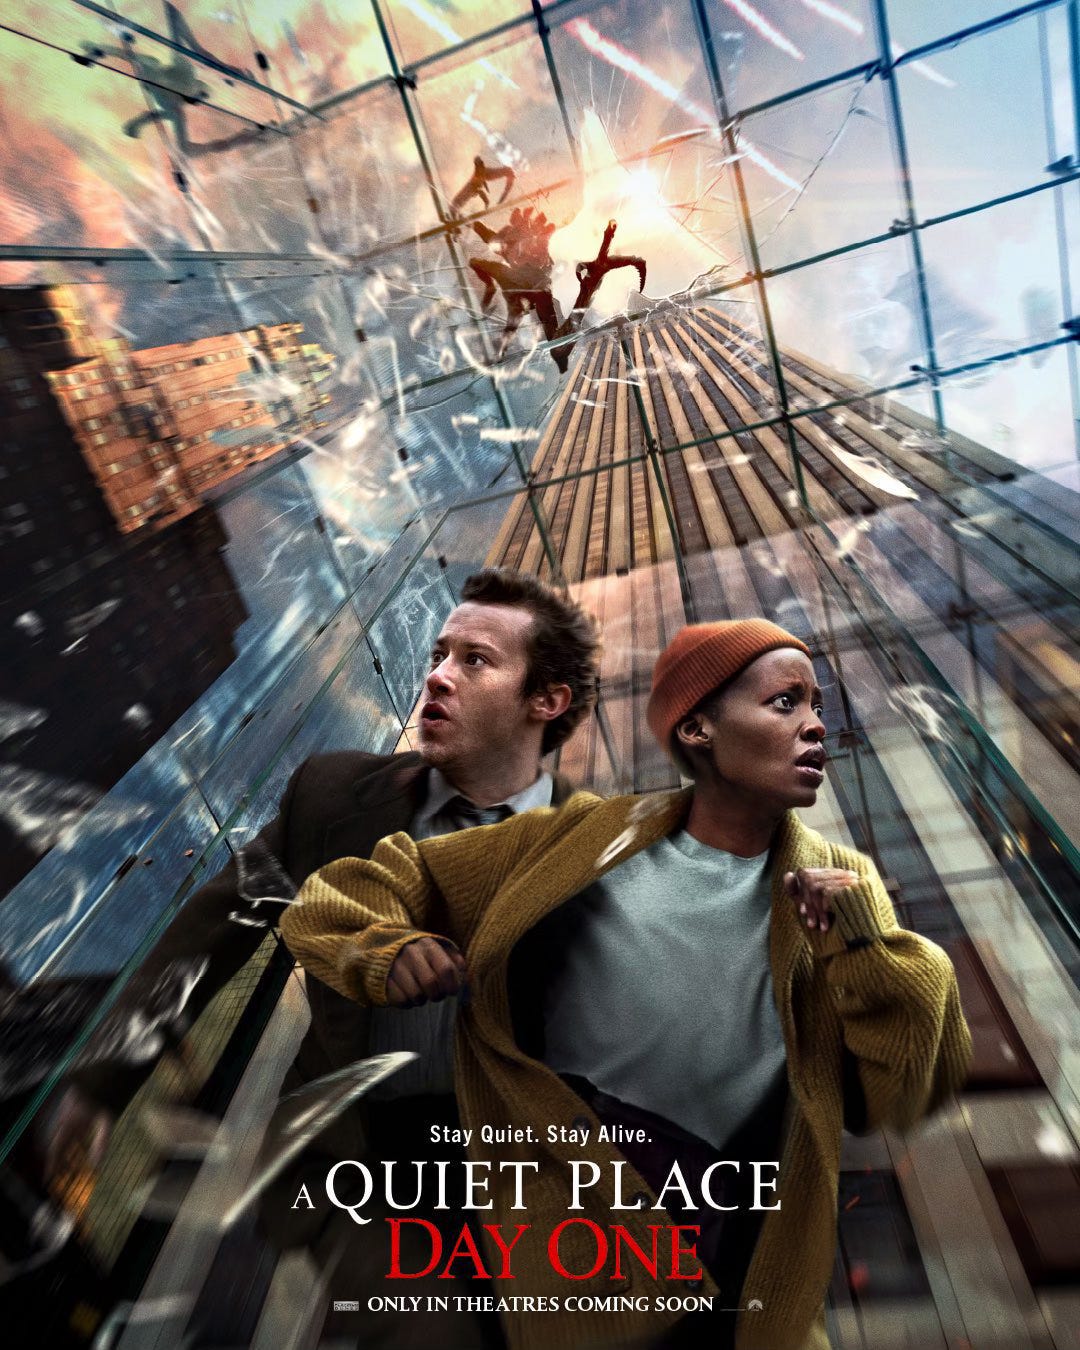 A movie poster for A Quiet Place: Day One. The camera is pointed up at the interior of Apple Fifth Avenue's glass cube, which is shattering.